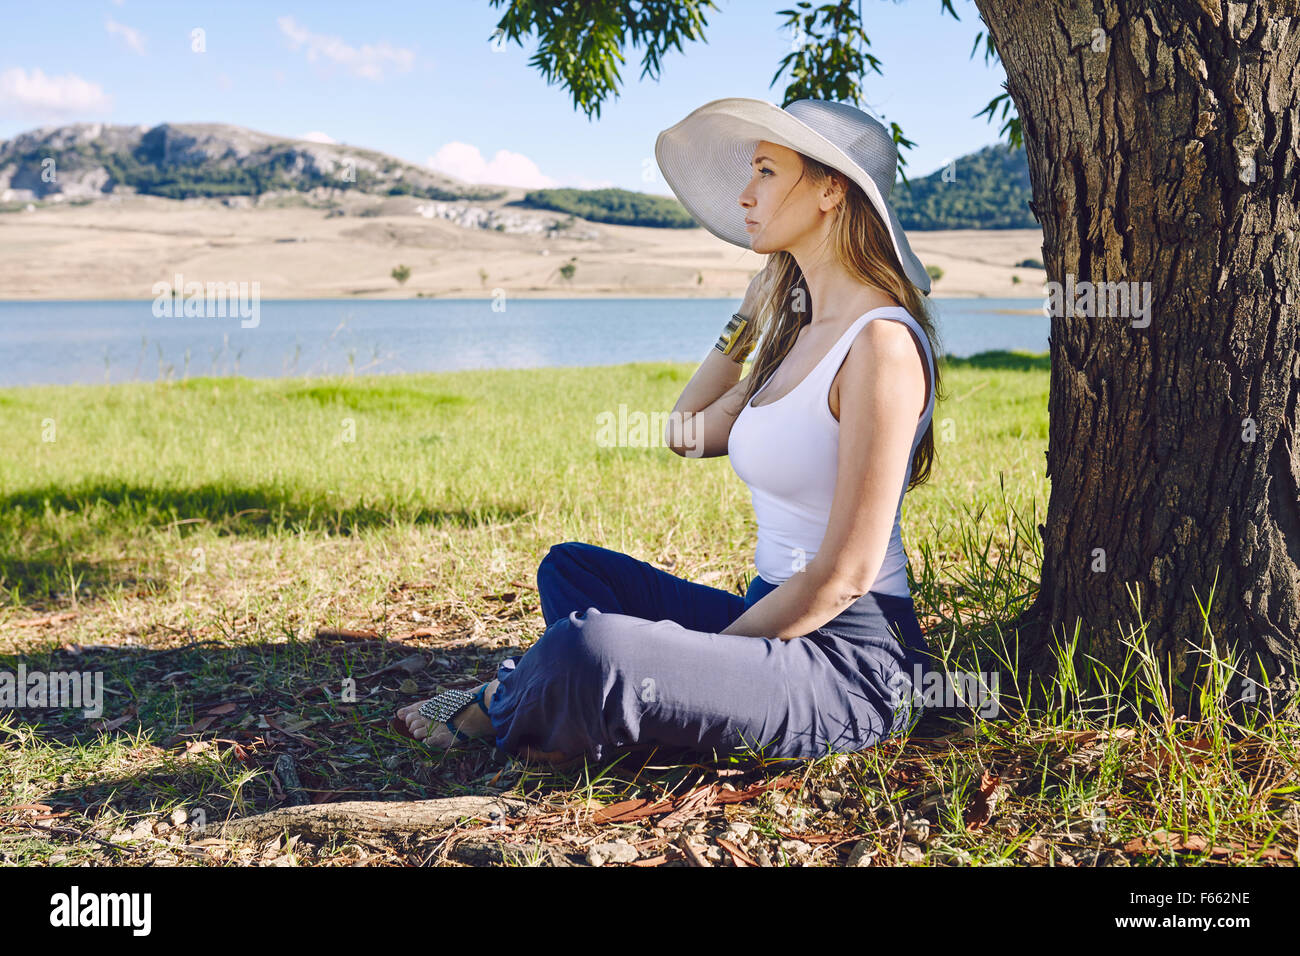 Blonde woman under a tree with a white hat Stock Photo